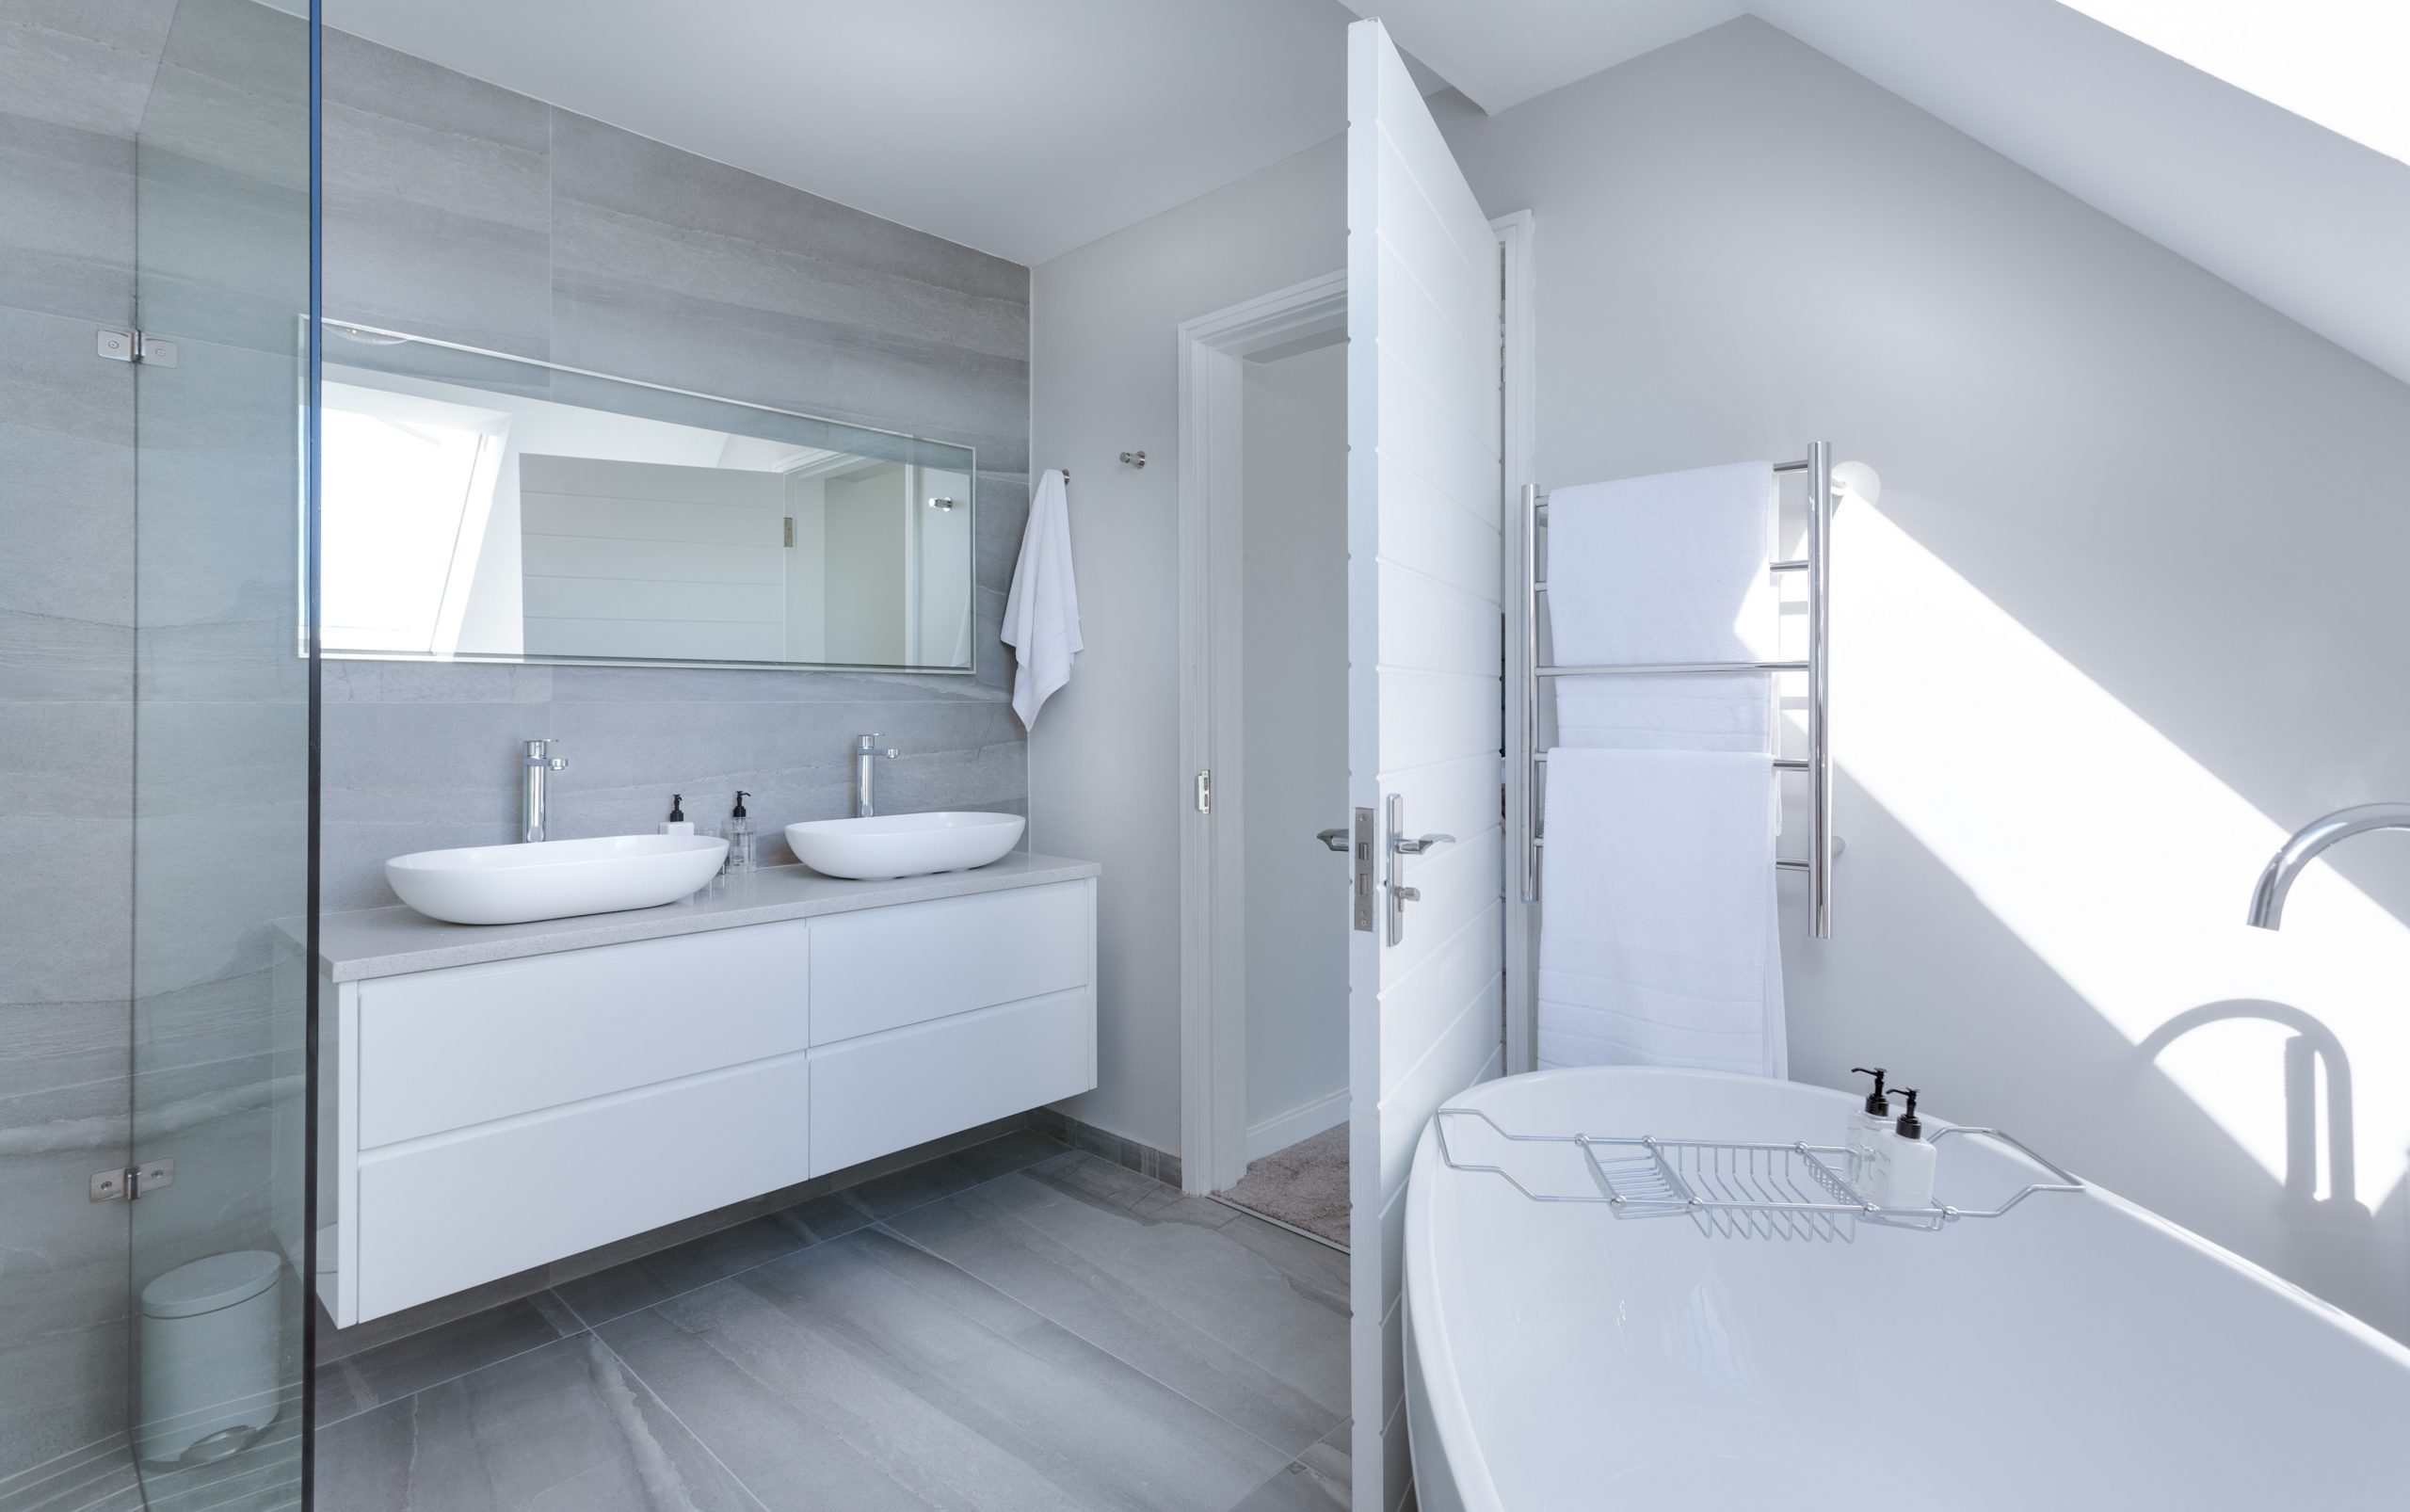 Modern white bathroom with standalone tub and double sink vanity.